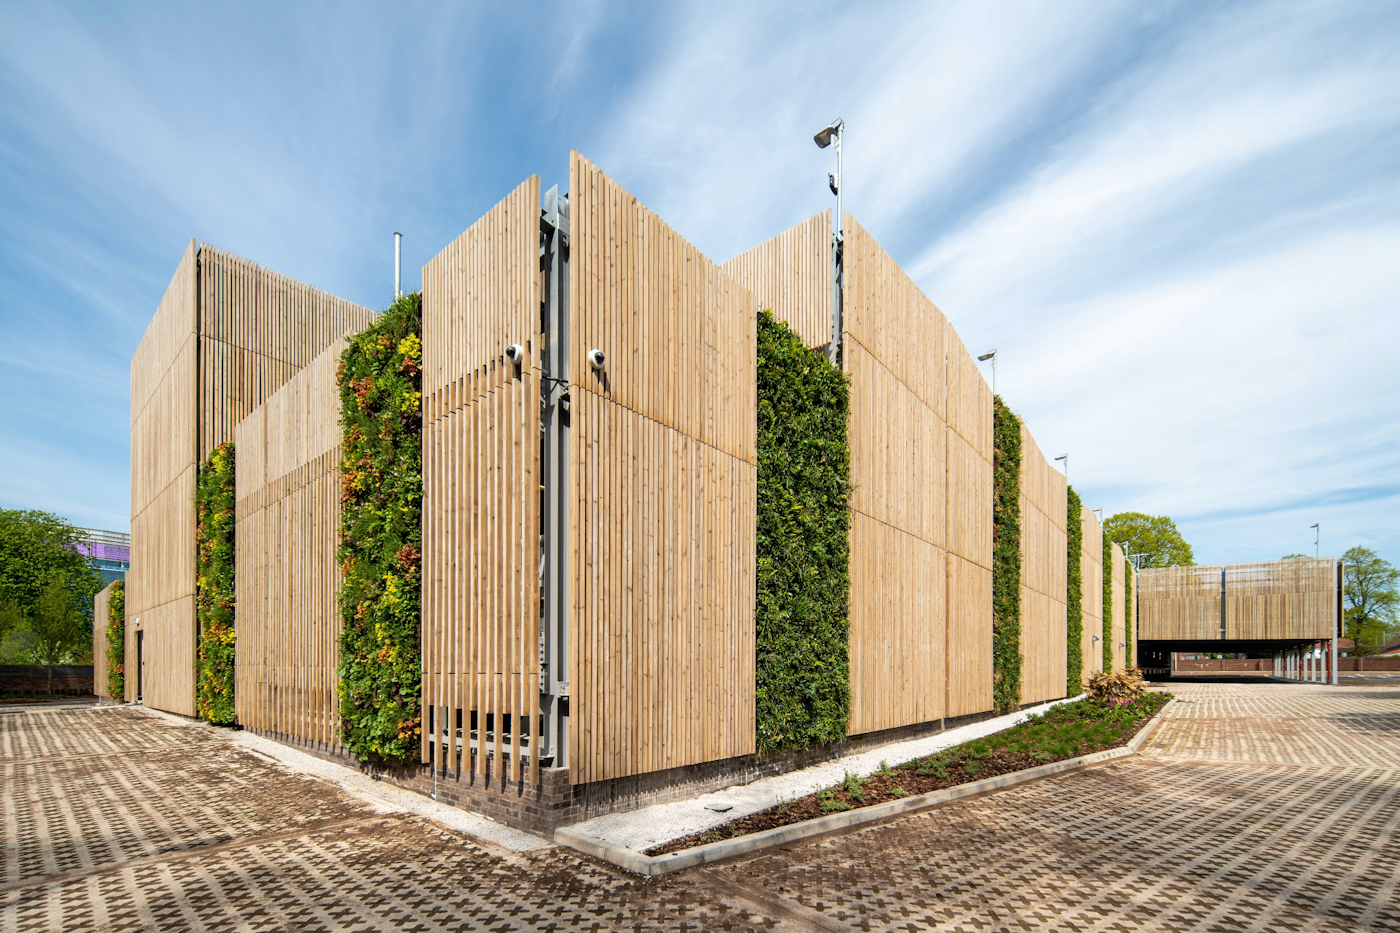 tiered car park with timber and plant facade